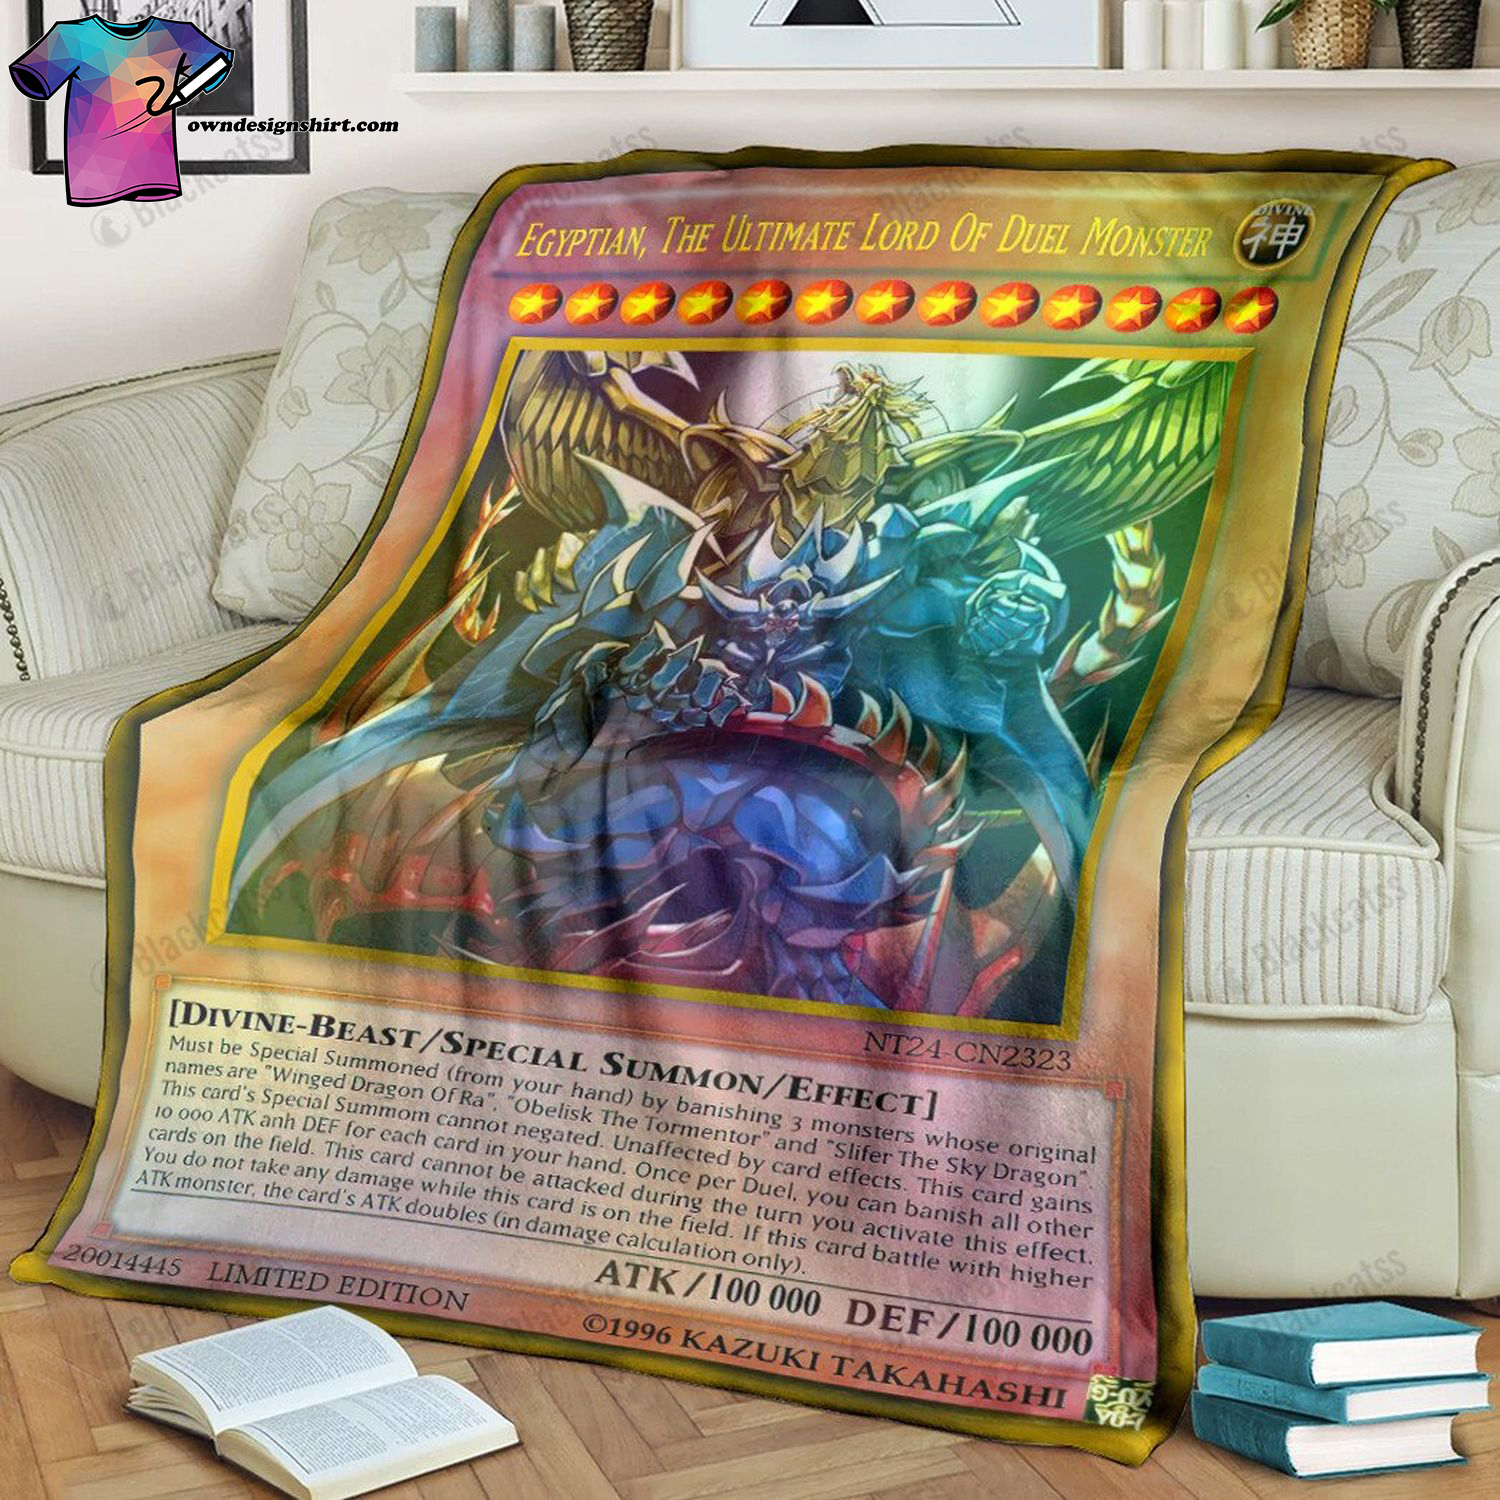 Game Yu-gi-oh Egyptian The Ultimate Lord Of Duel Monster Soft Blanket